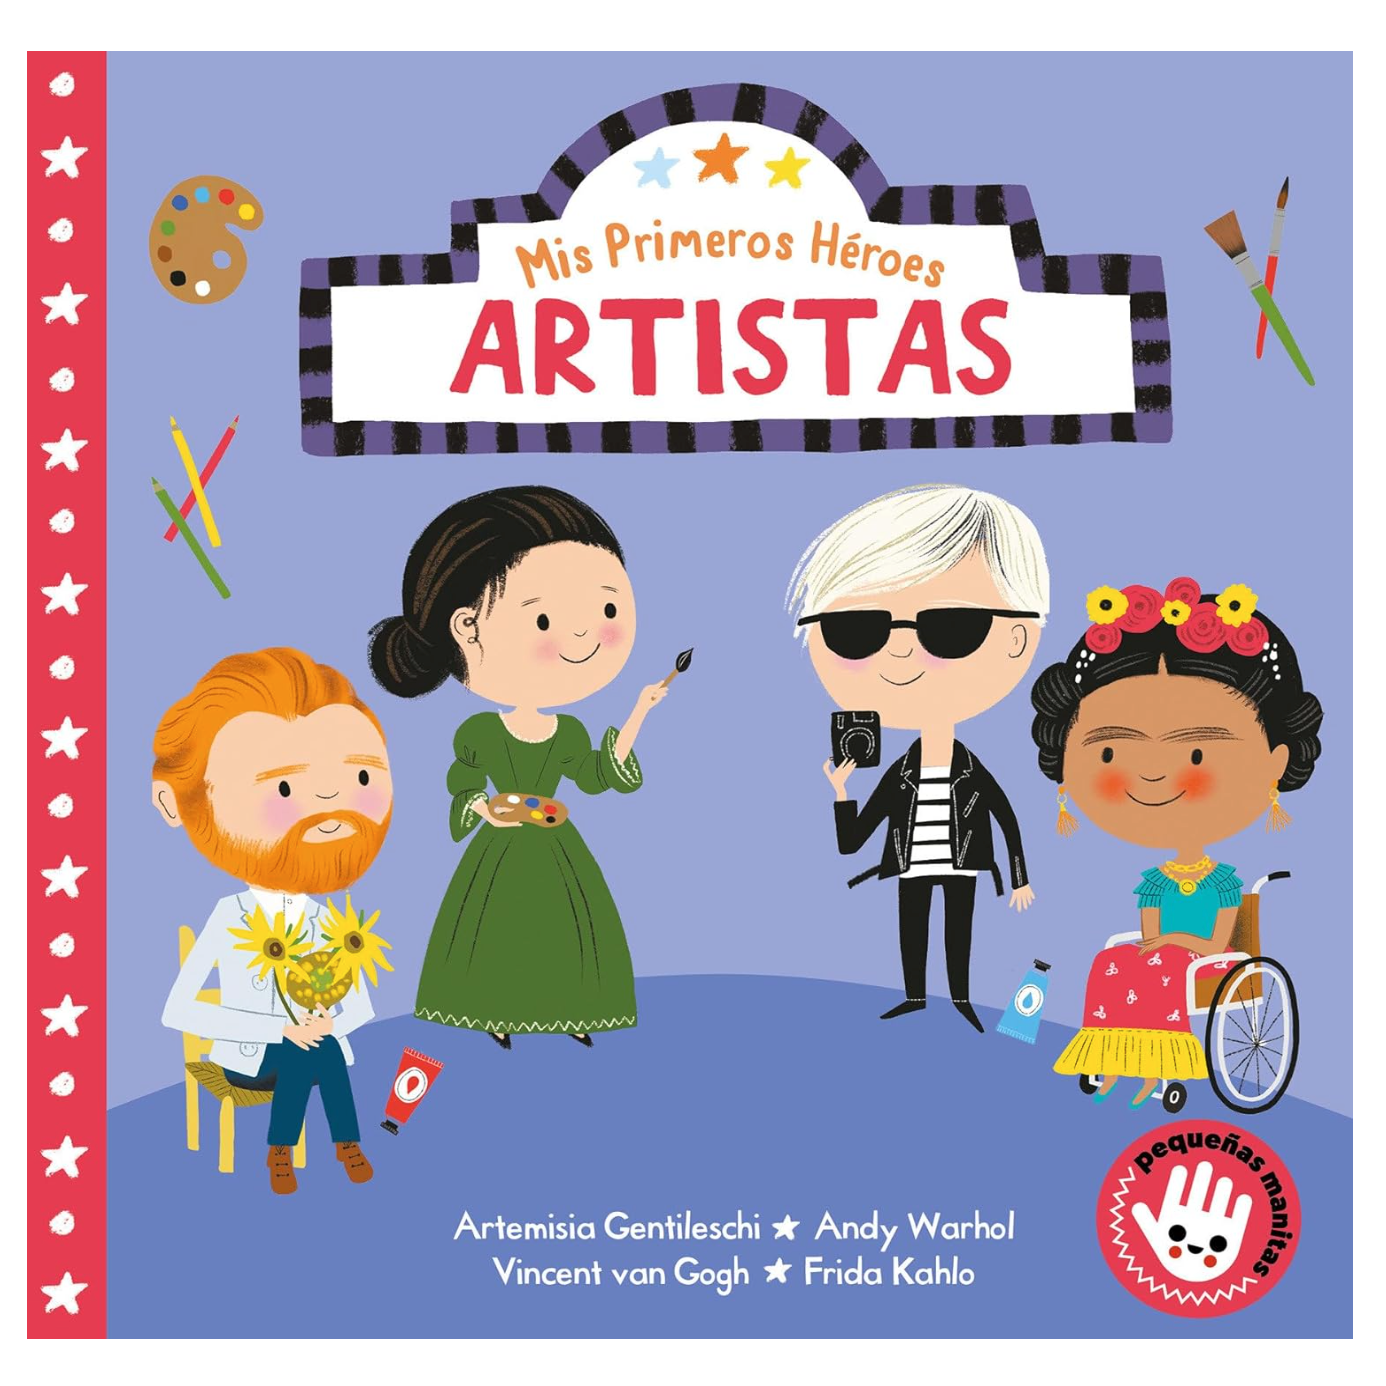 Mis primeros héroes: artistas / My First Heroes: Artists (Spanish Edition) book.